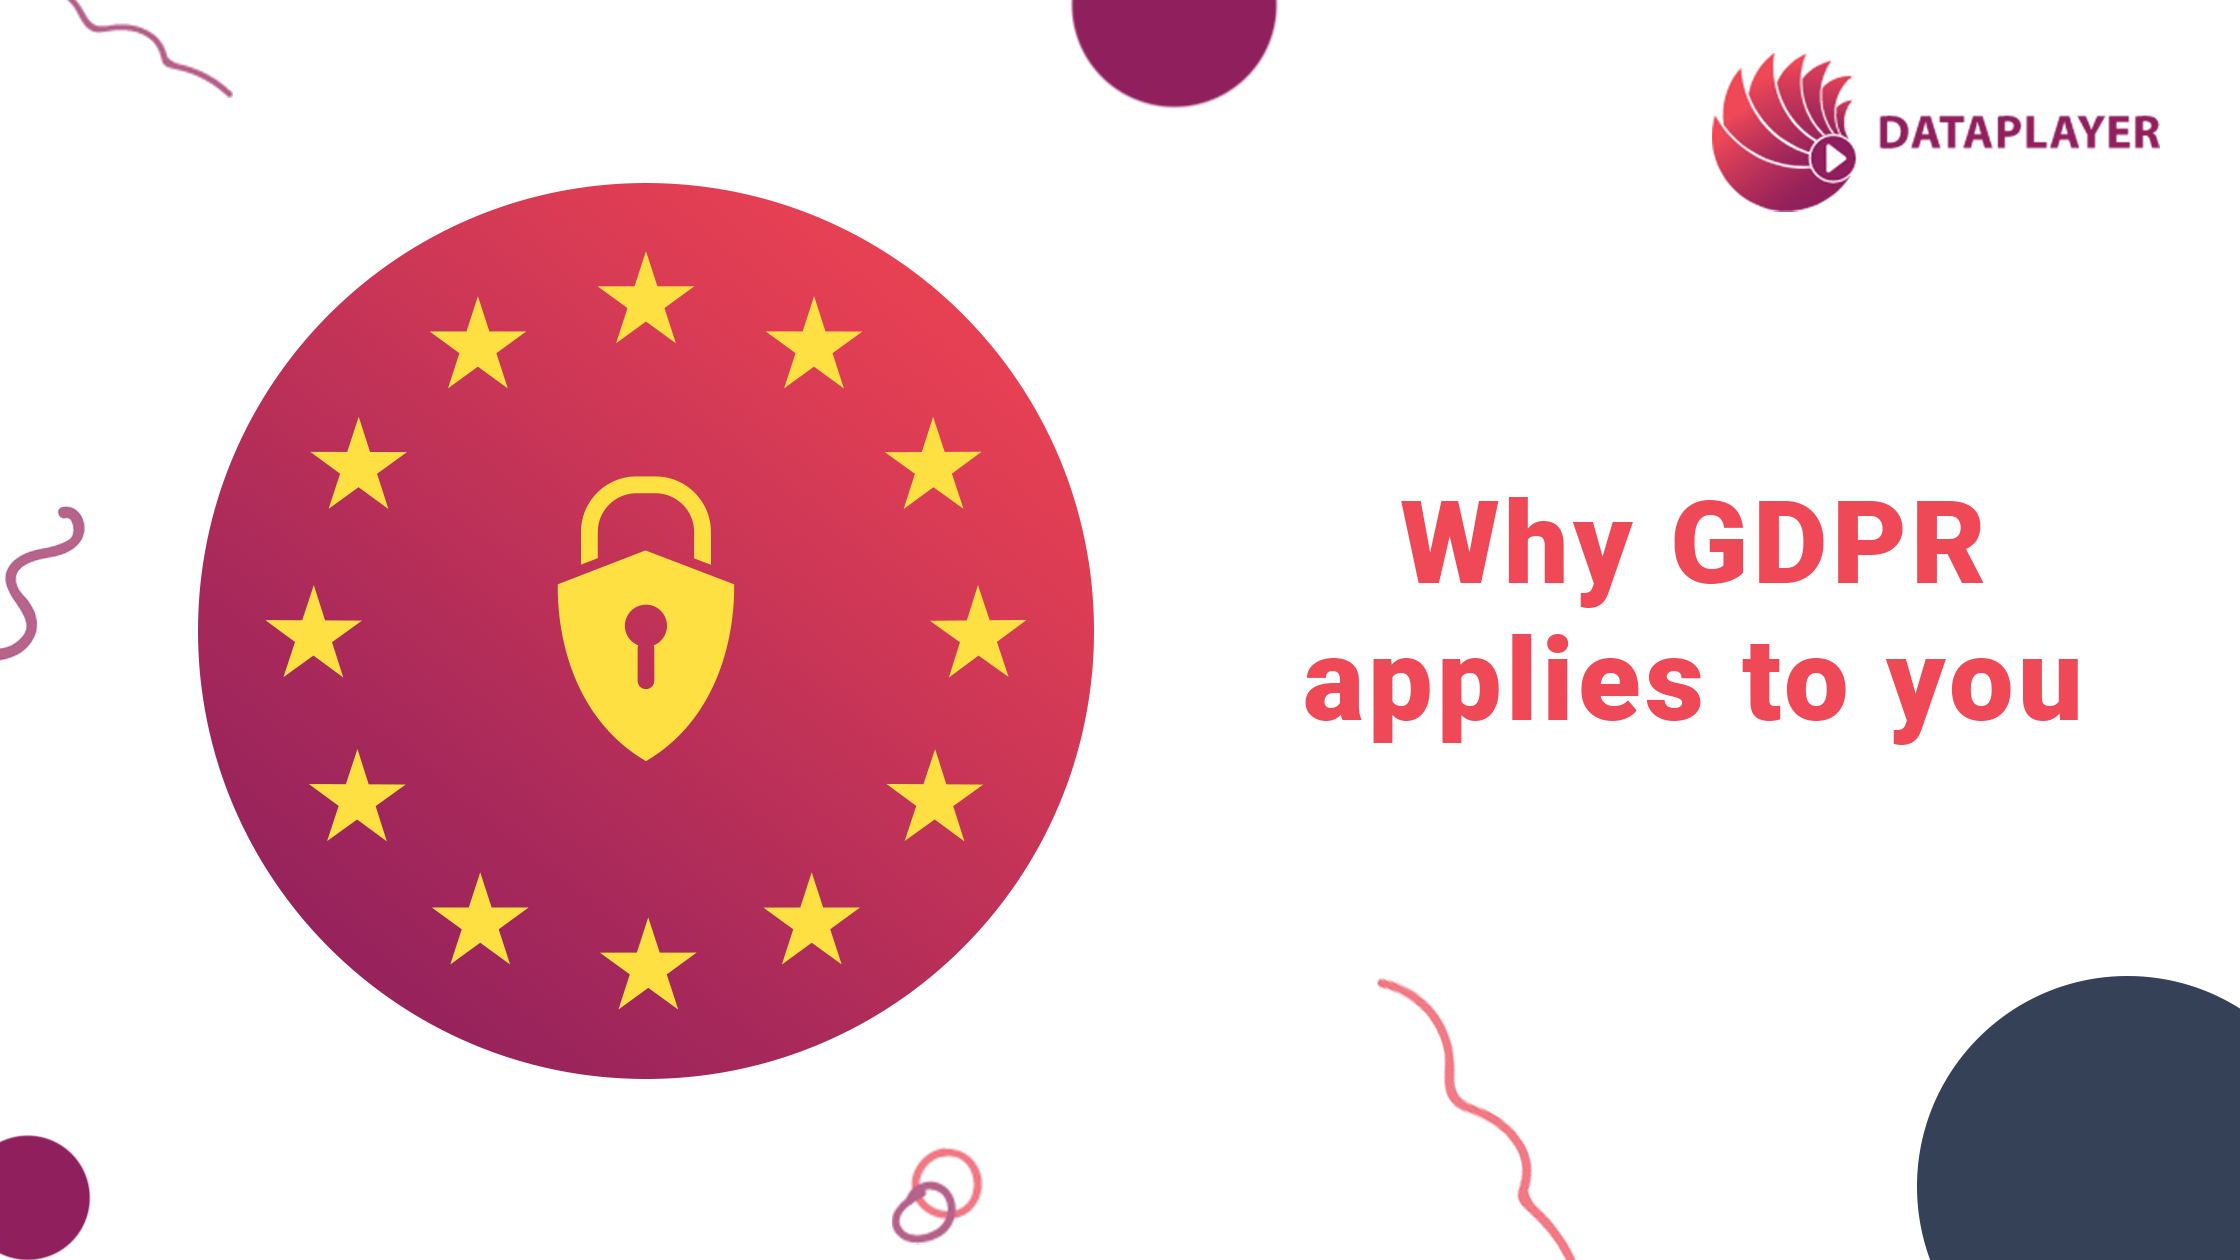 Why GDPR applies to you